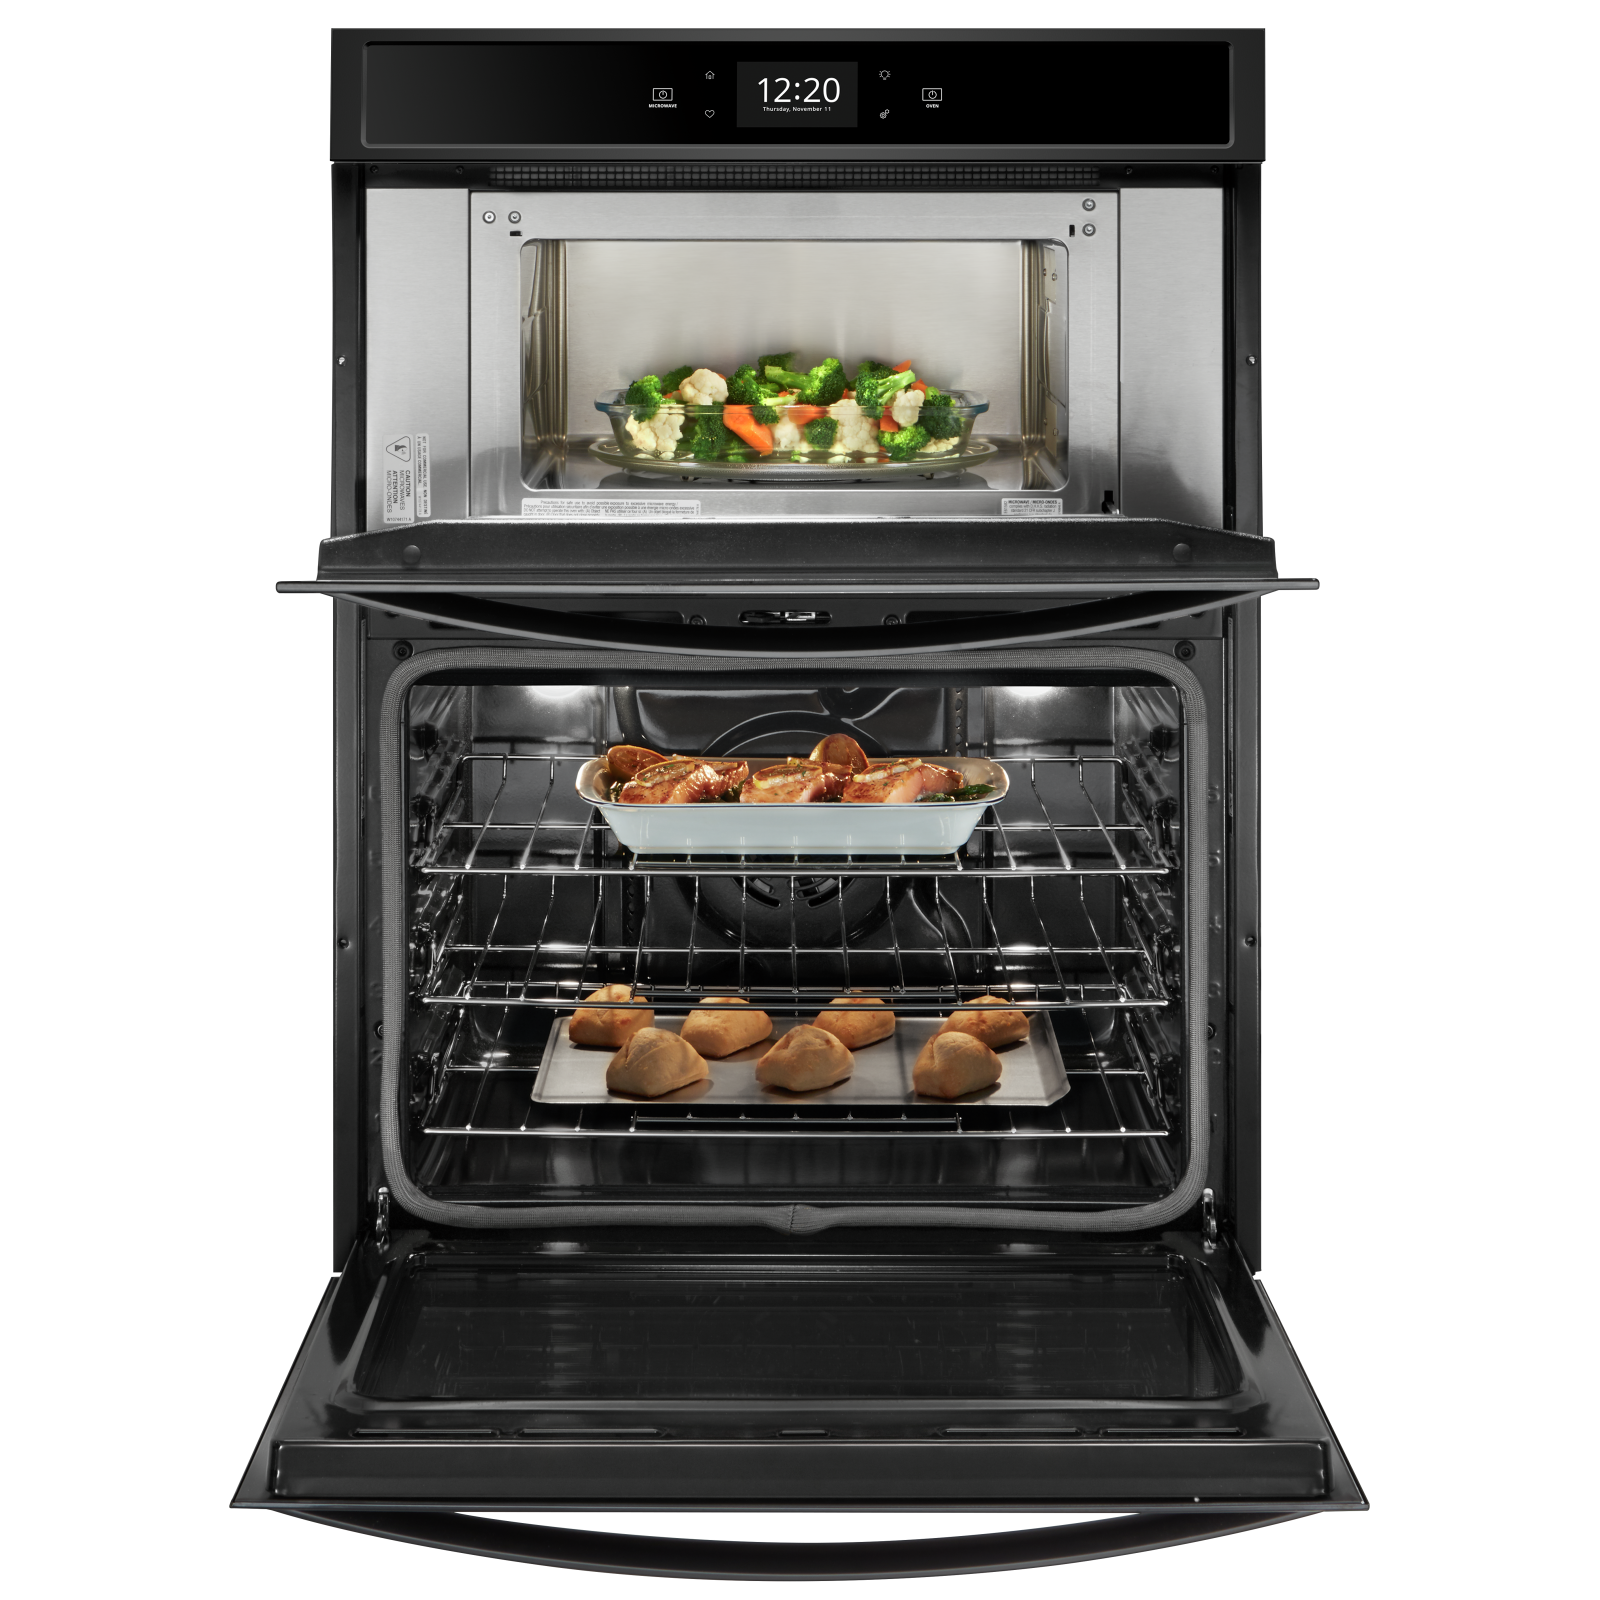 Whirlpool - 6.4 cu. ft Combination Wall Oven in Black - WOC75EC0HB